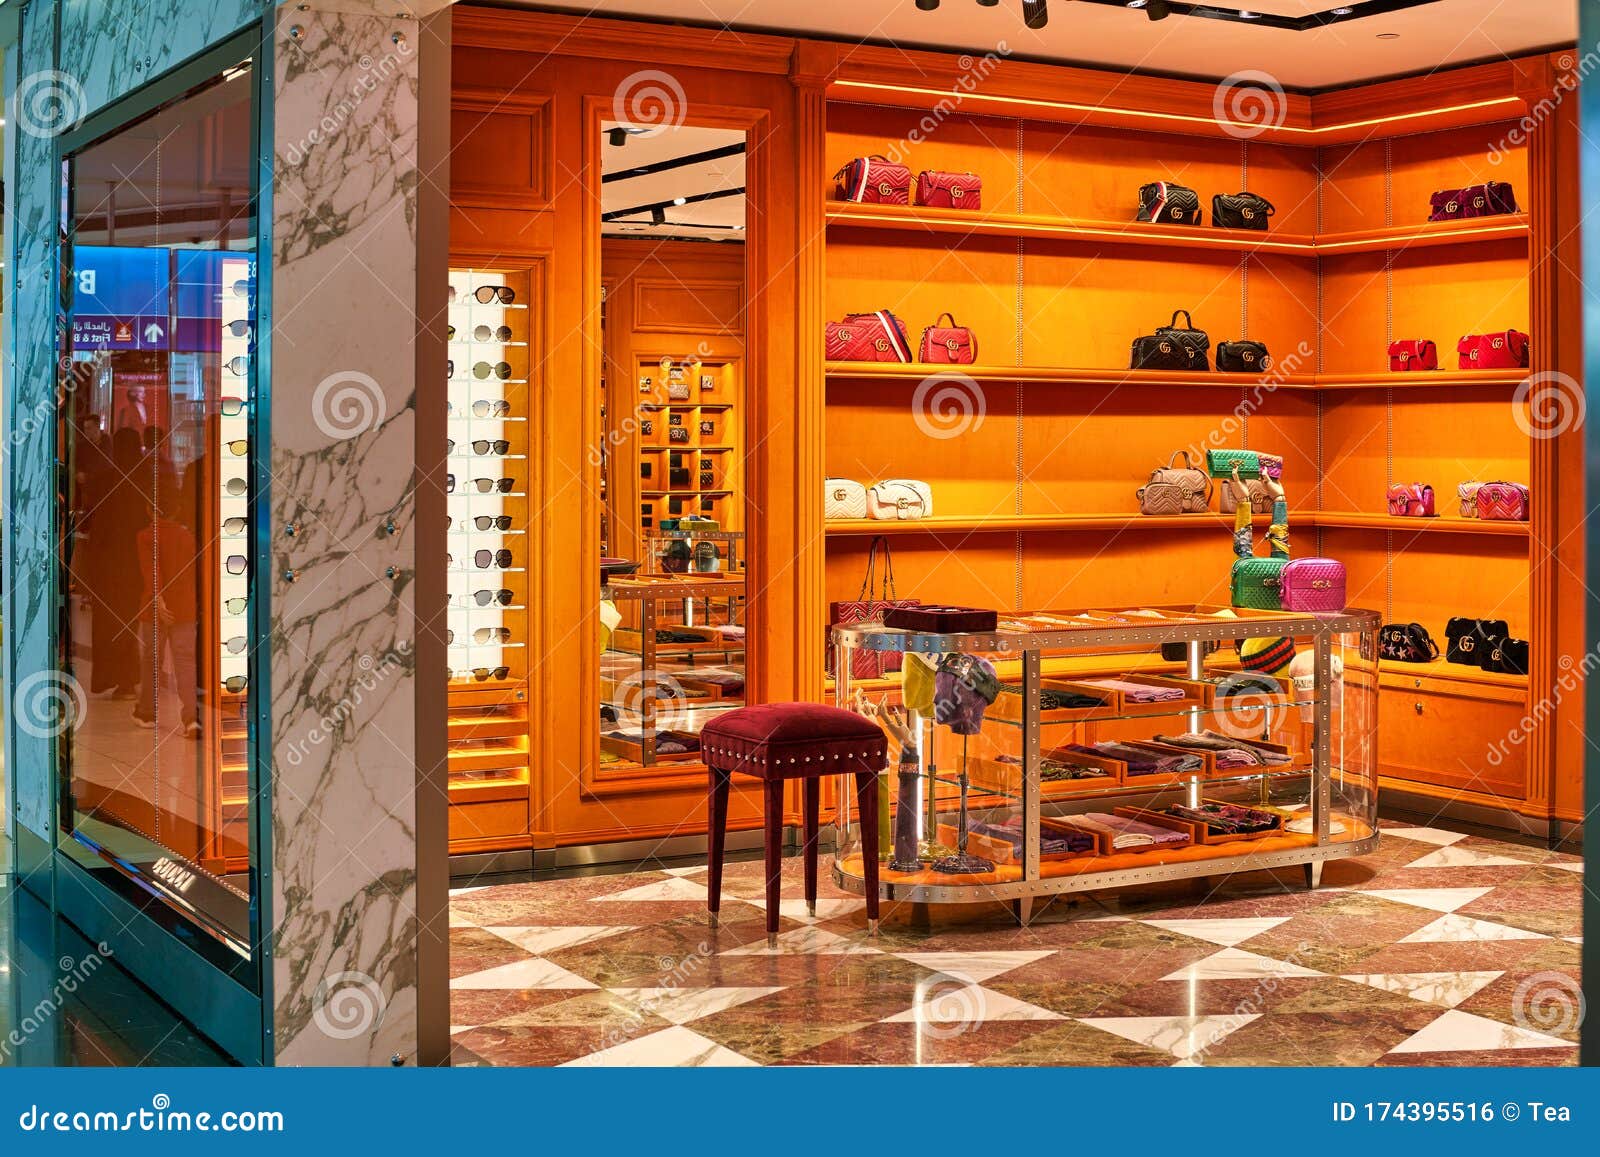 Gucci Store Dubai Intarnational Airport Editorial Photo - Image of collection, goods: 174395516